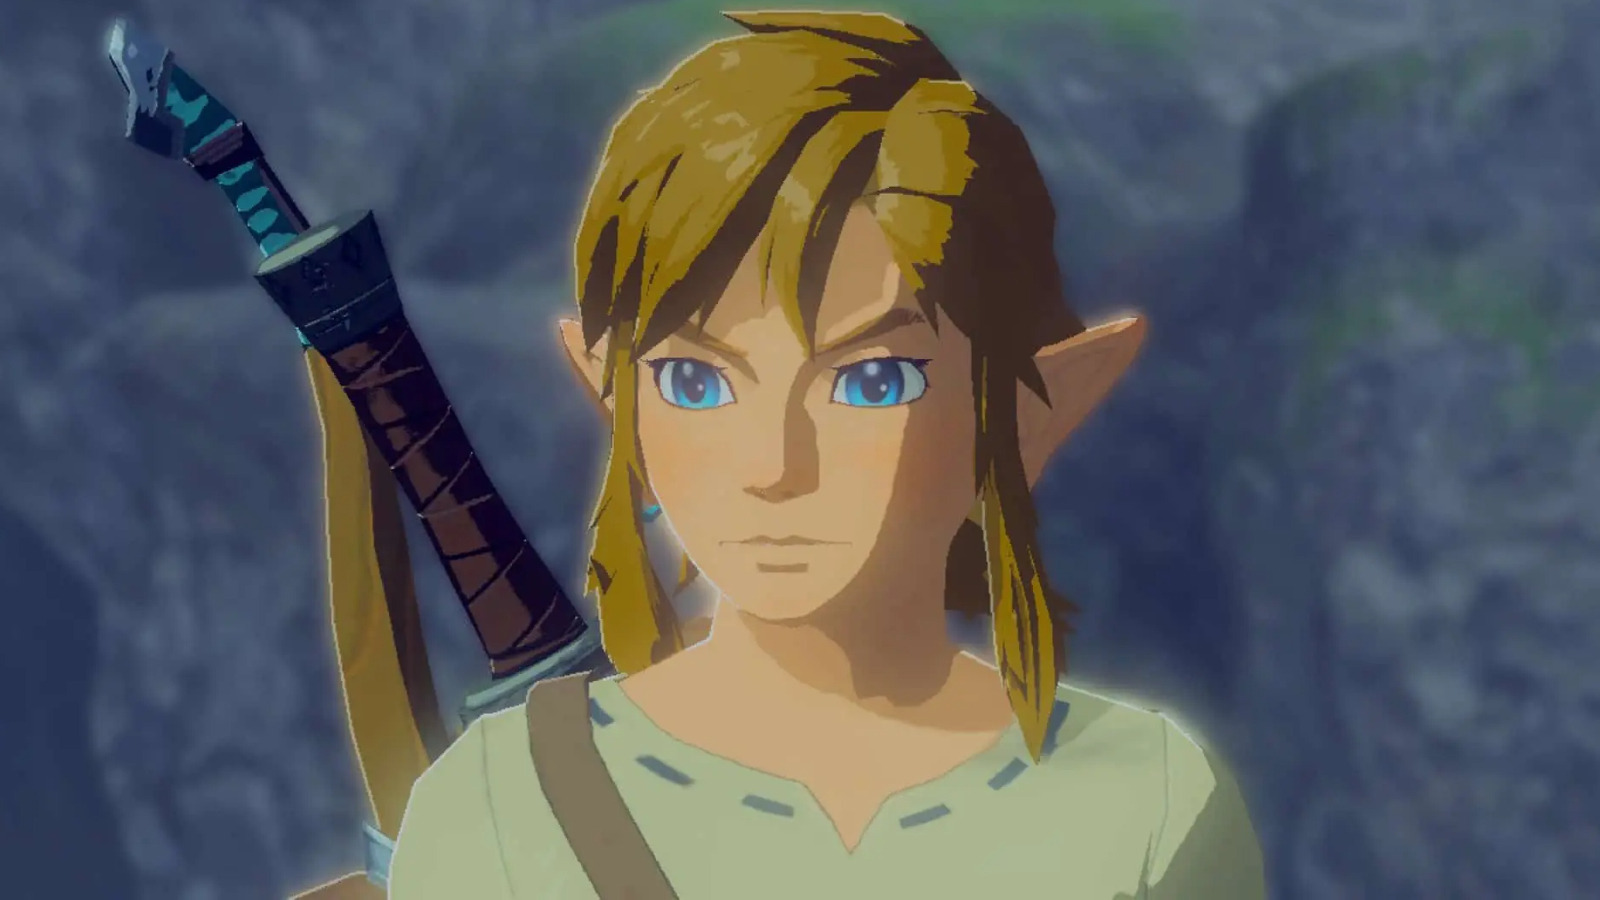 The Legend of Zelda director says the movie is more live-action Miyazaki  than Lord of the Rings